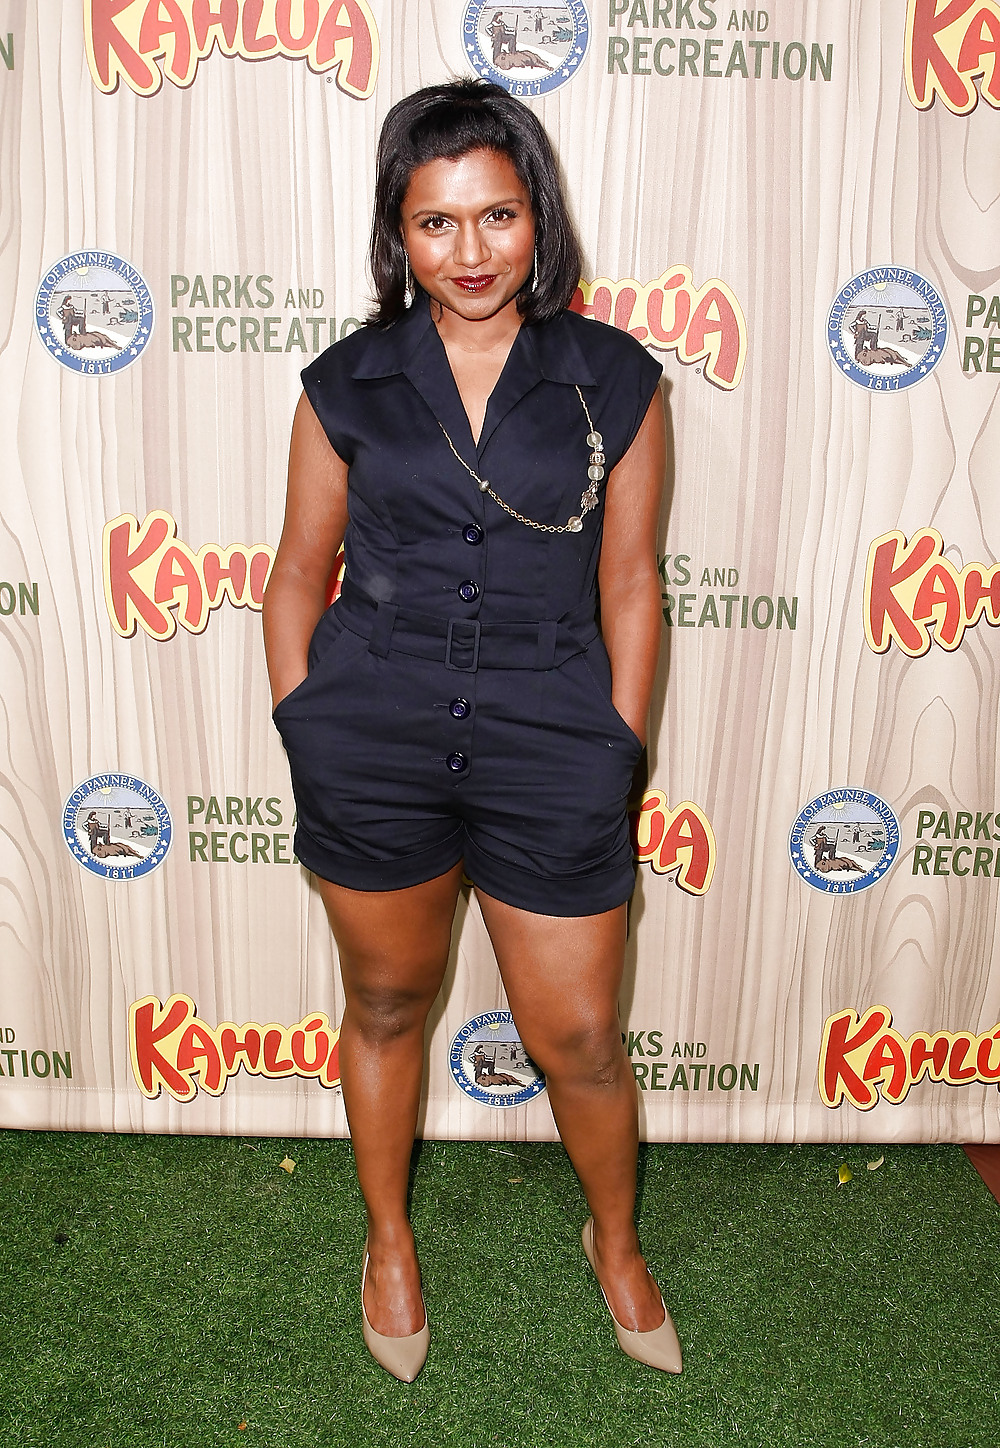 Hot Indian comedian Mindy Kaling - What would you do to her? #16250665